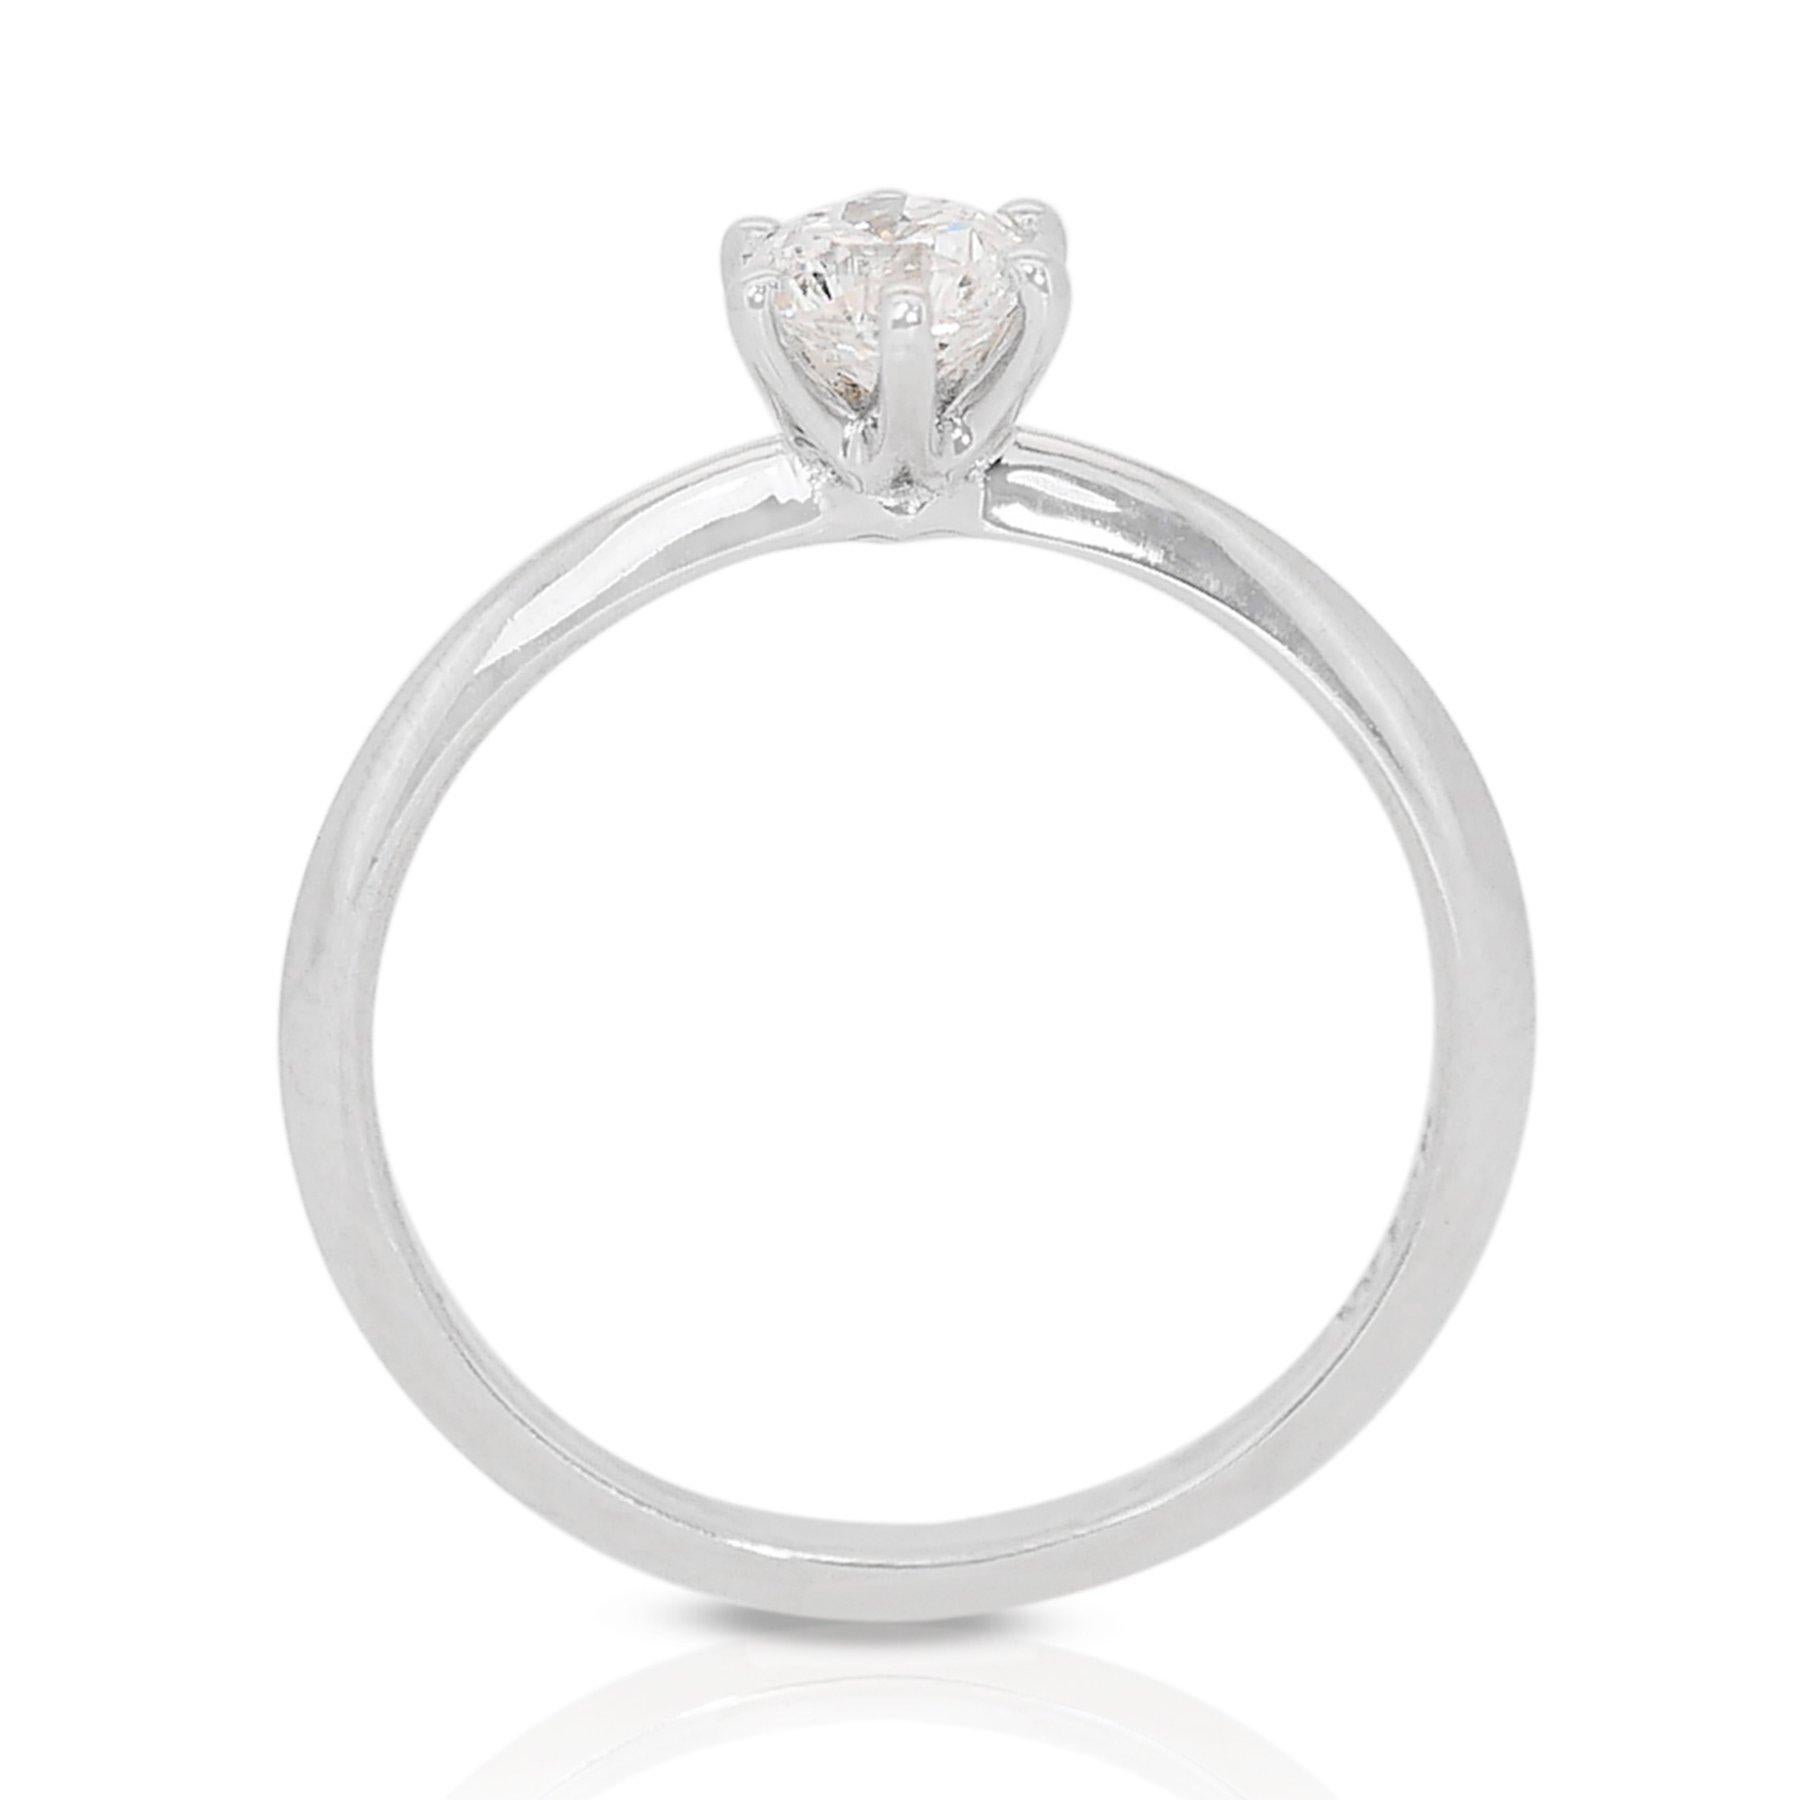 Exquisite 0.70ct Round Diamond Solitaire Ring in 18k White Gold - GIA Certified For Sale 2